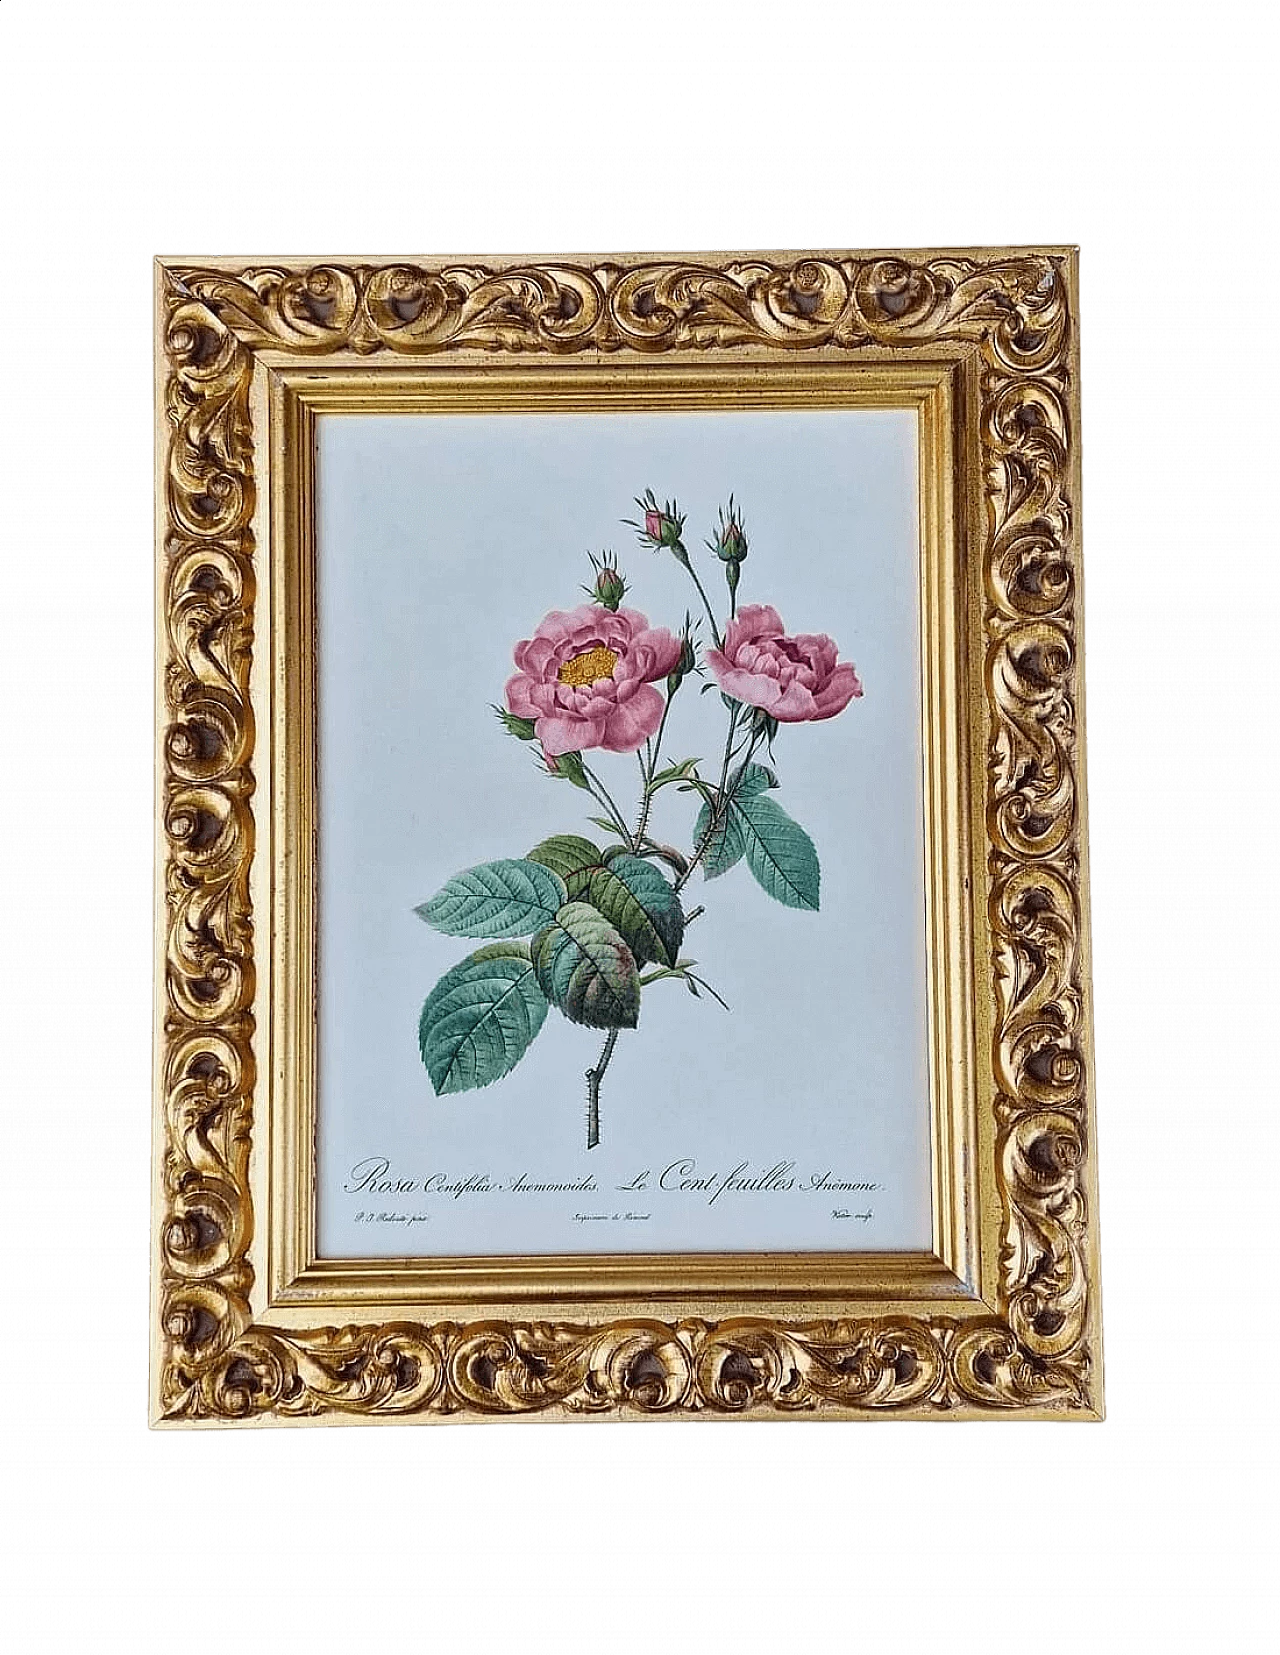 Pierre-Joseph Redouté, Rose, engraving with gold frame, 1959 15